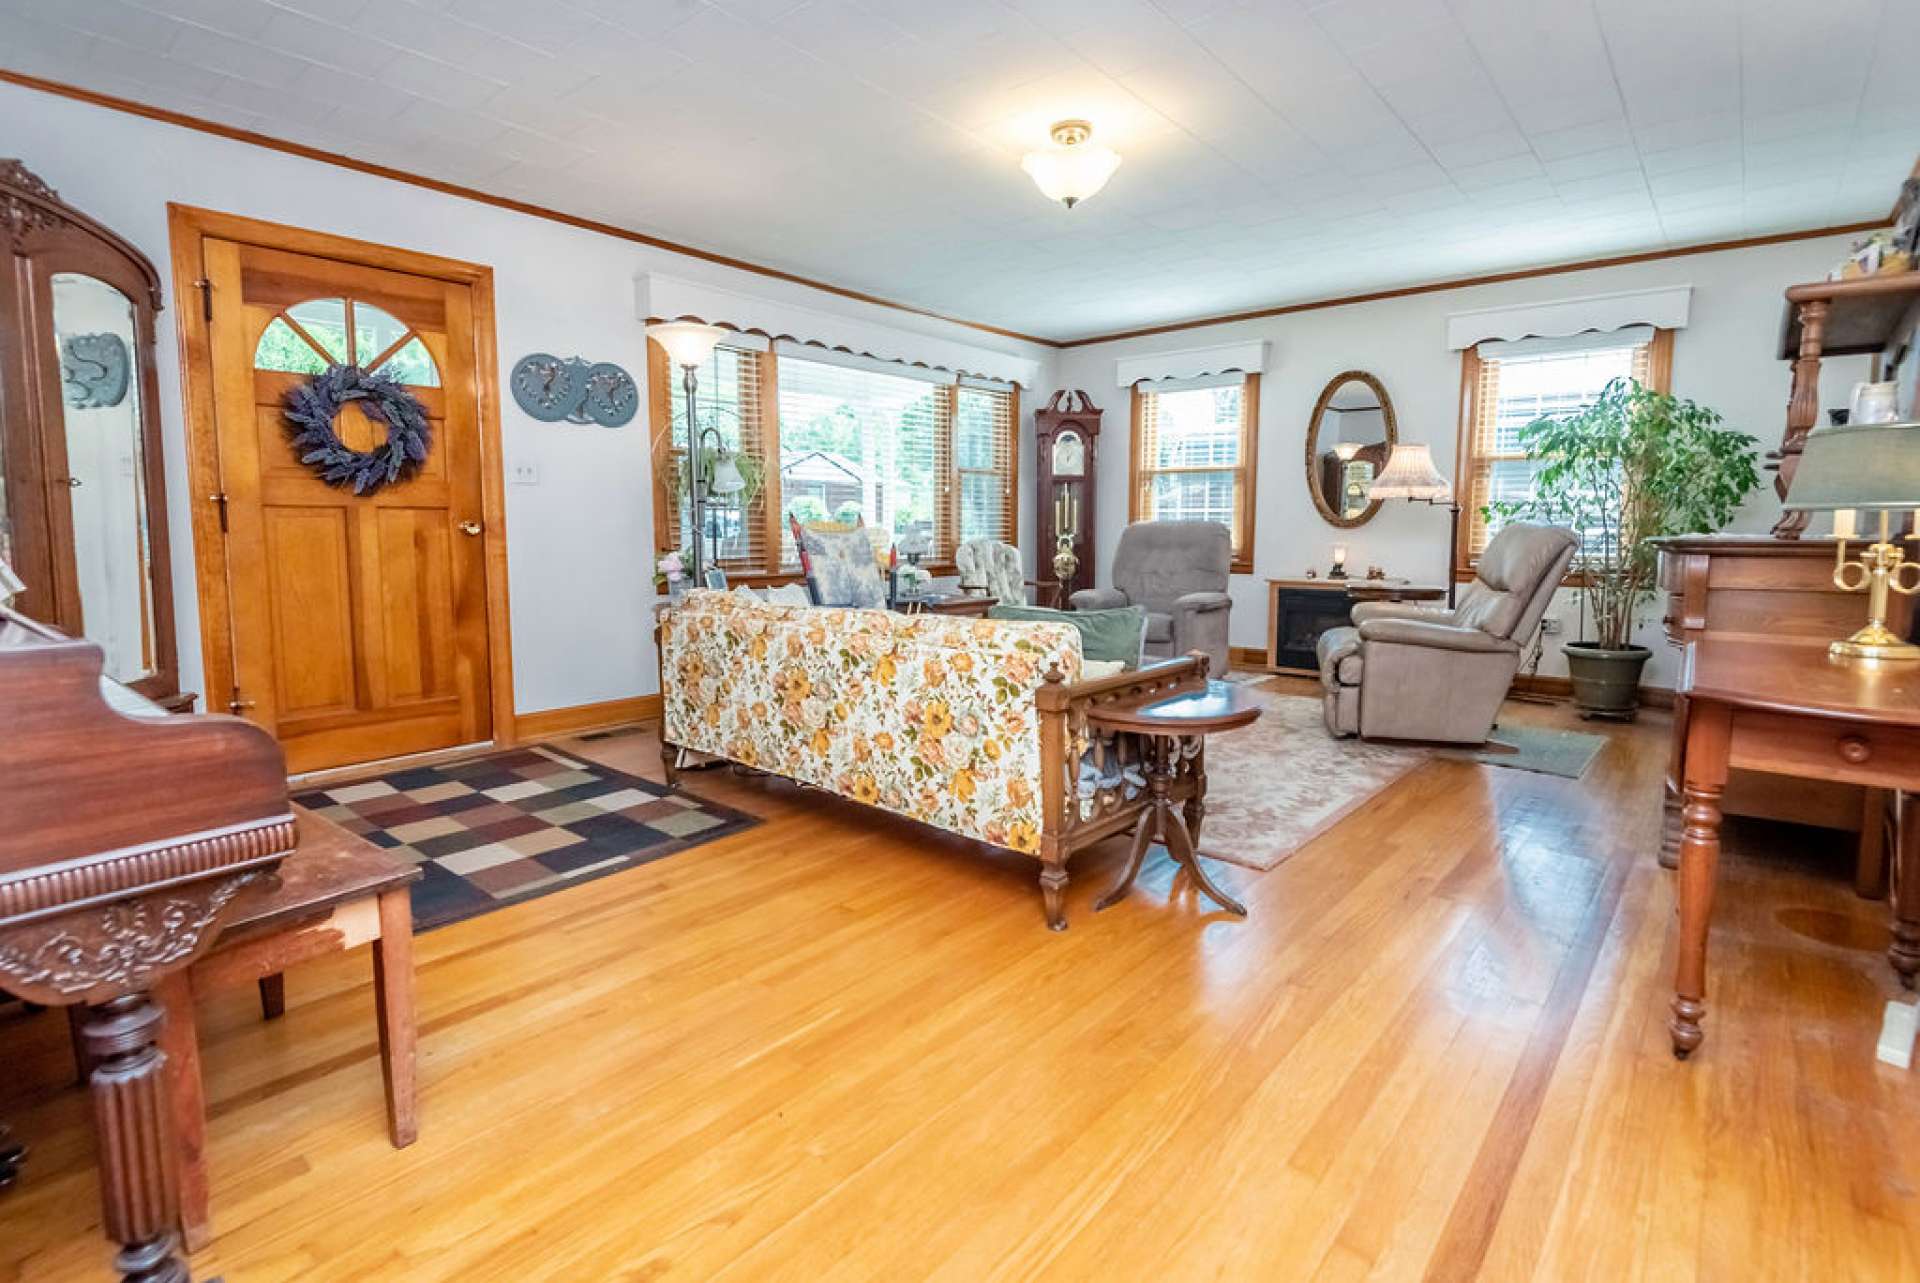 Hardwood flooring throughout with the exception of kitchen and bathrooms.